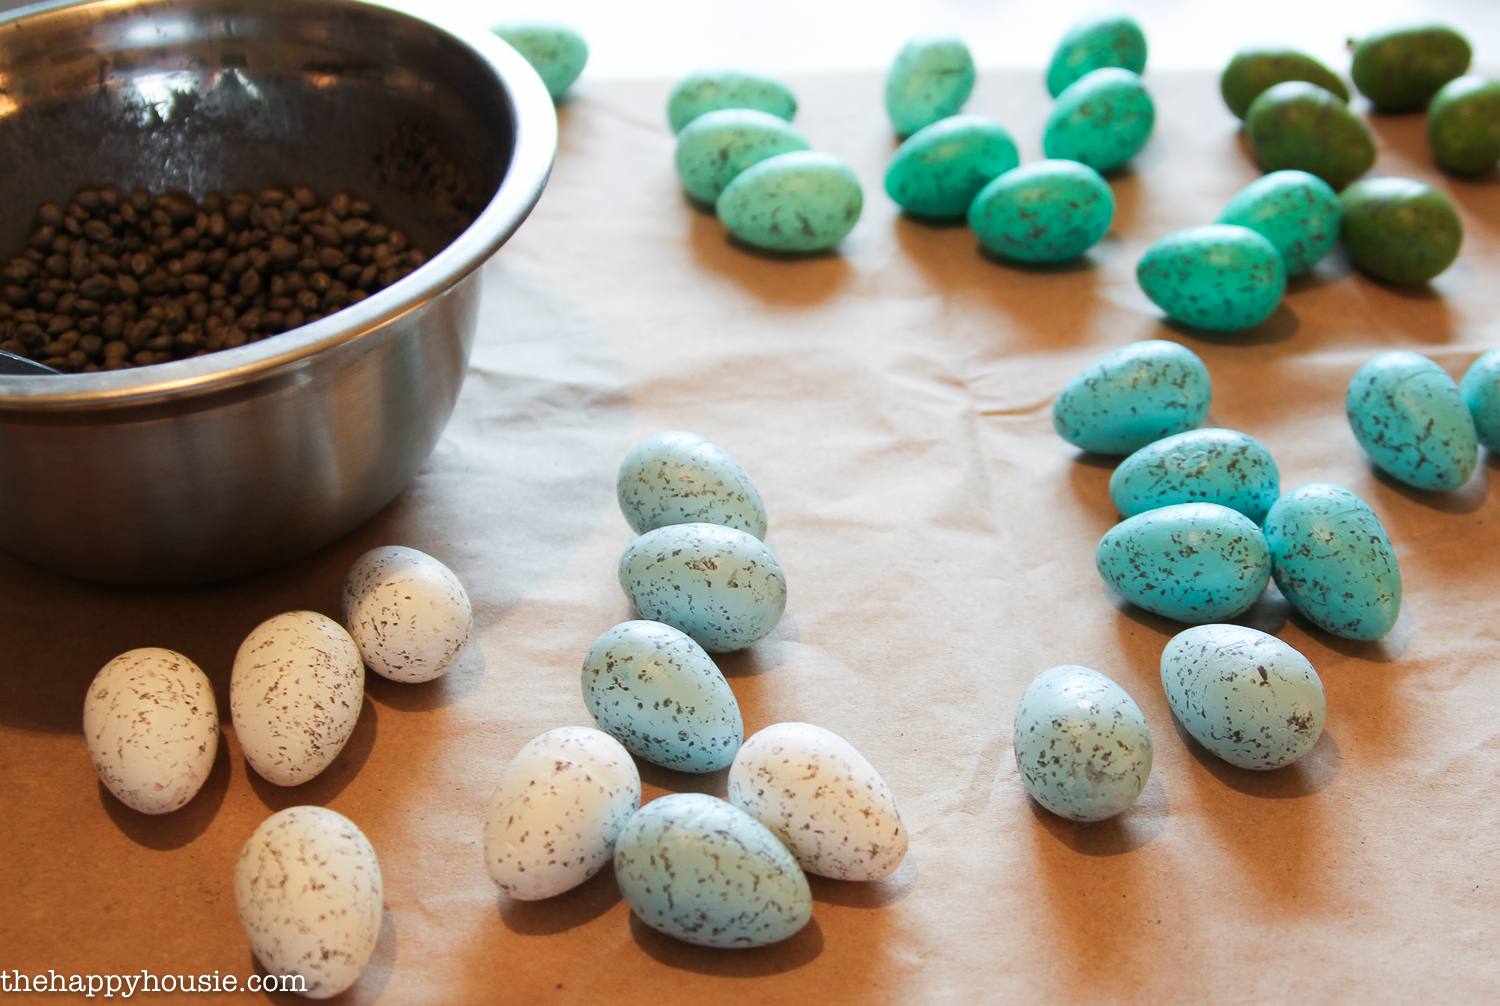 The spackled Easter eggs on the counter.